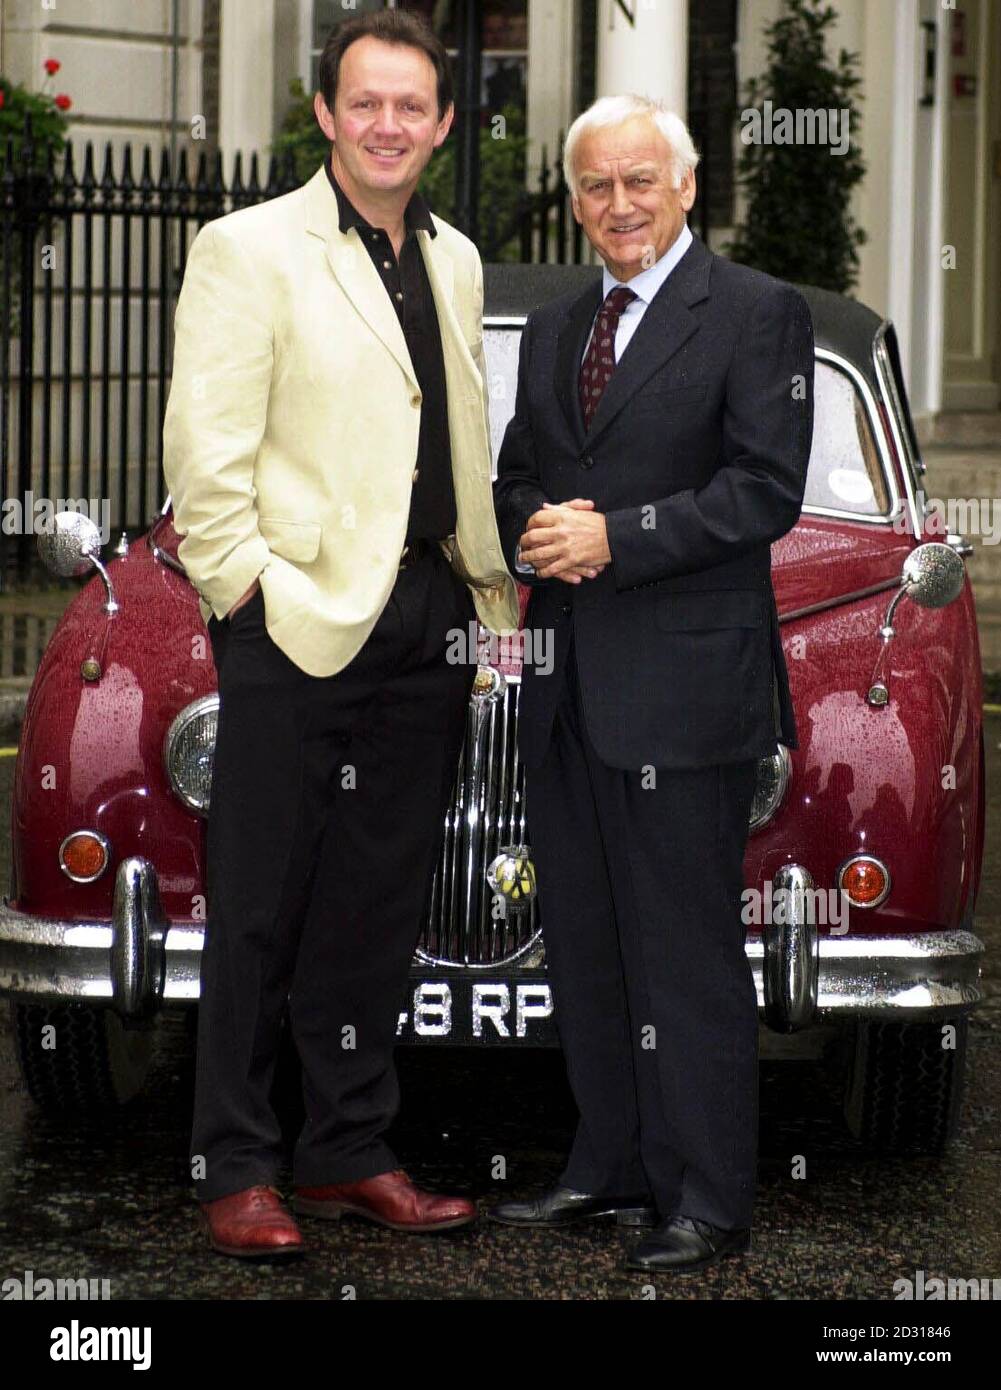 TV series Inspector Morse star John Thaw (right) and Kevin Whately, who plays Sgt Lewis, pose by Morse's Jaguar in St James's Square, central London,  before filming the last ever Inspector Morse. Stock Photo